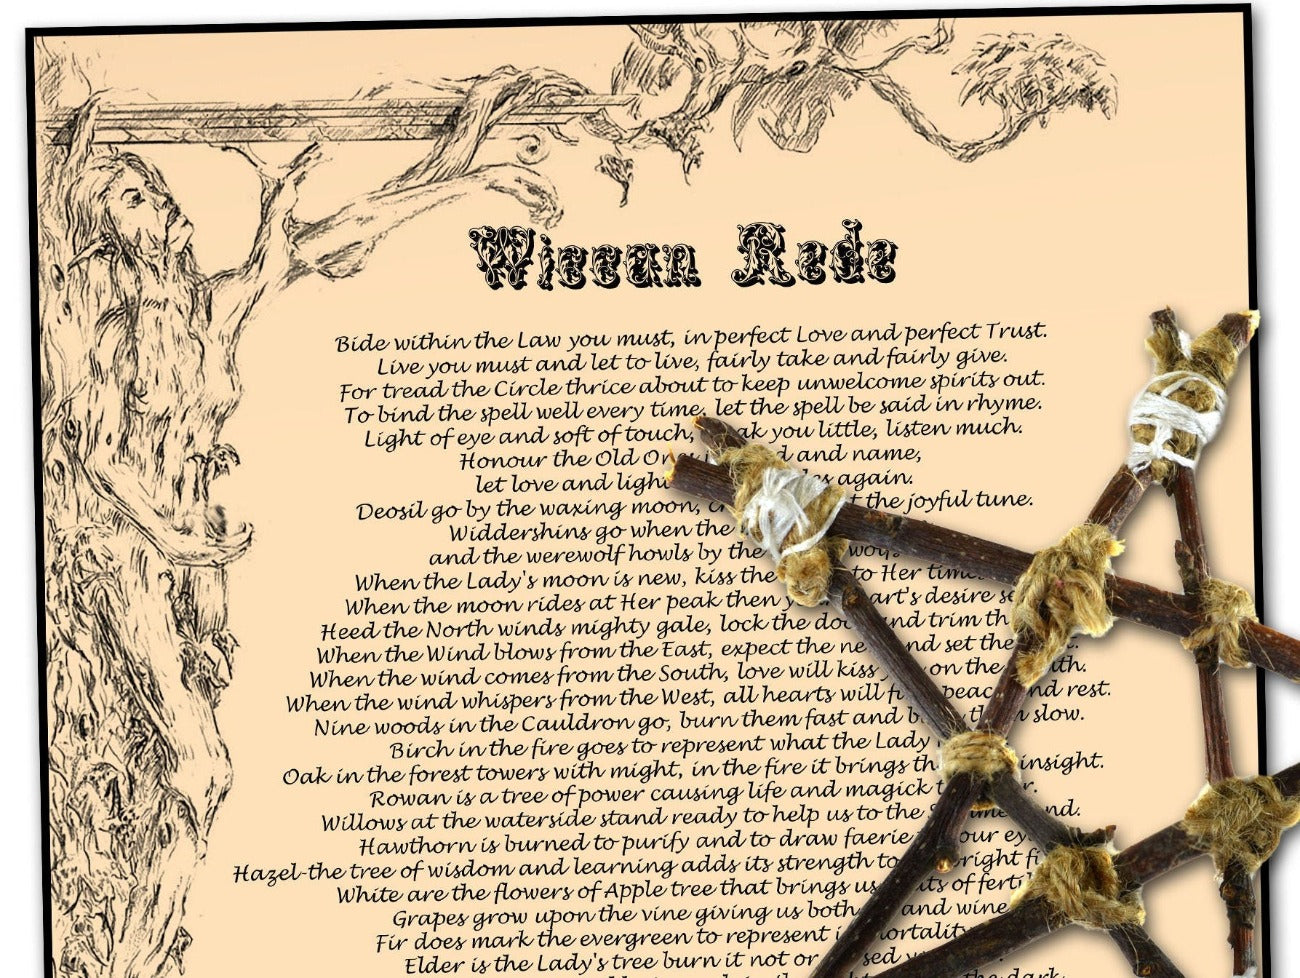 WICCAN REDE, Laws of Wicca, Wiccan Creed, An Harm Ye None, Wicca Witchcraft Magic Threefold Law, Witchs Creed, Do What you Will, Printable - Morgana Magick Spell